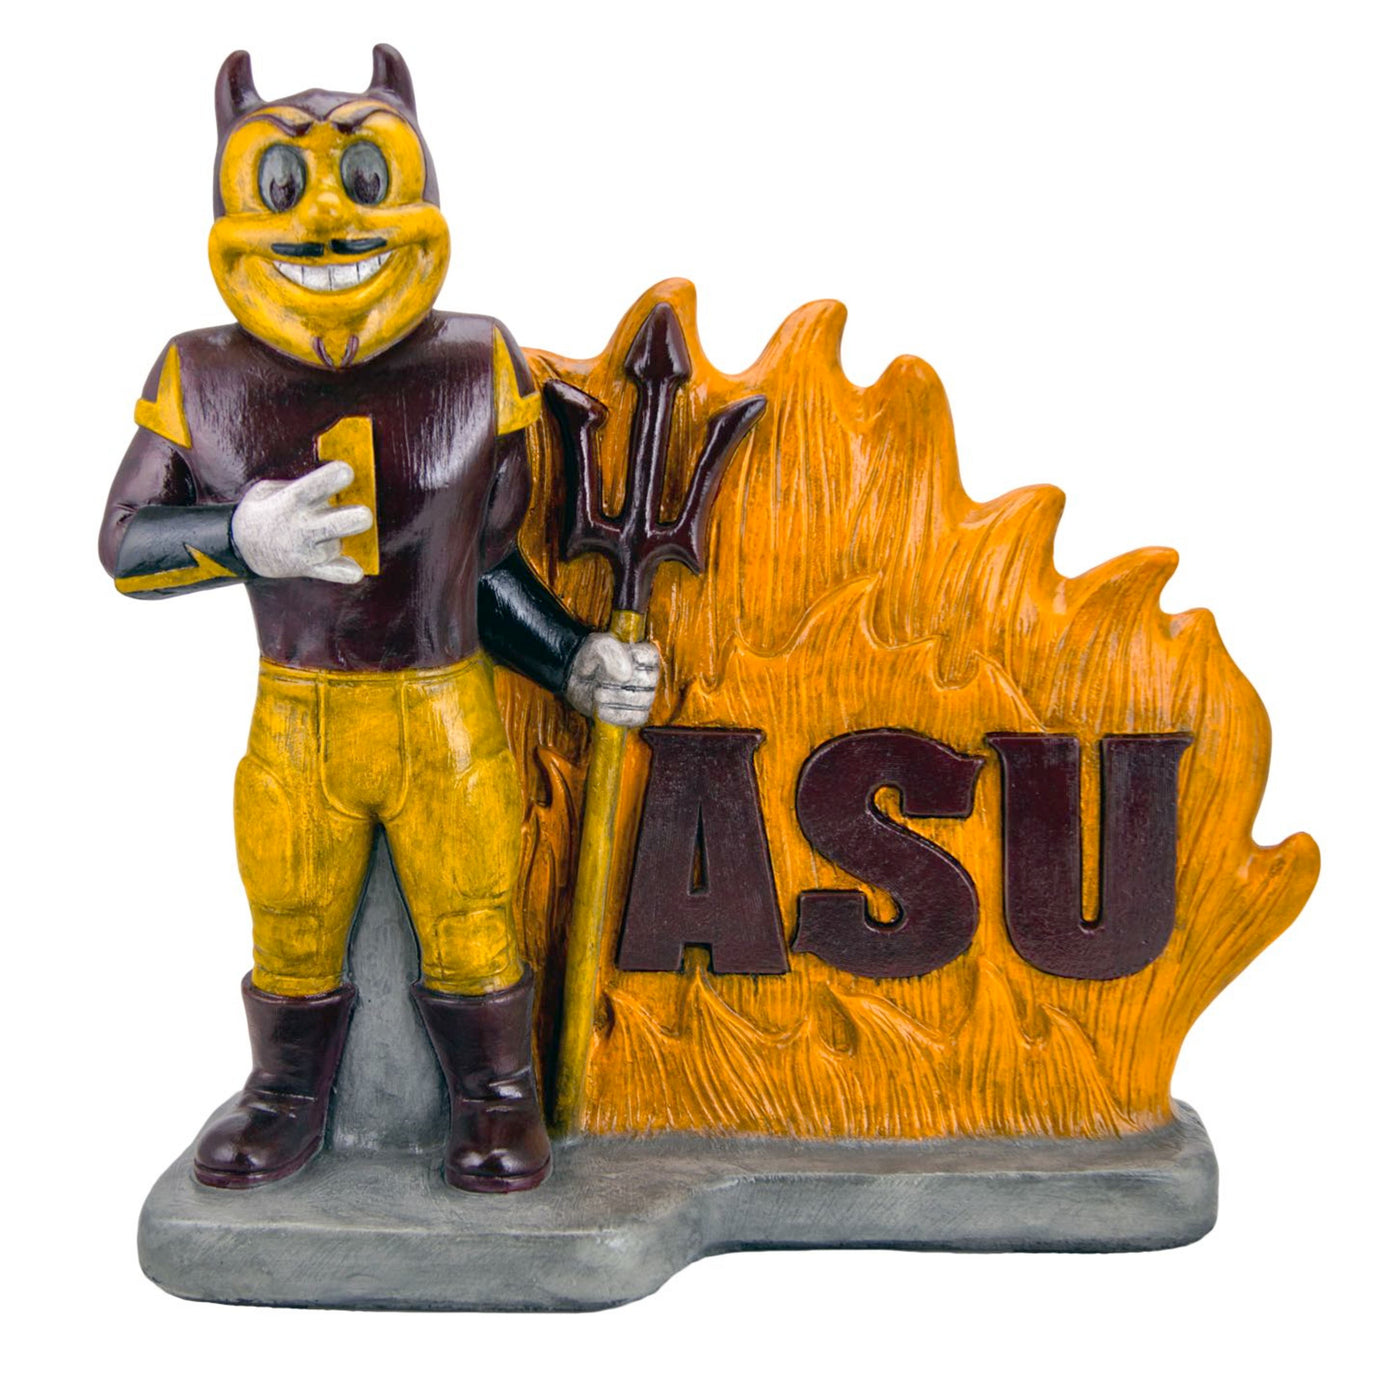 ASU stone statue of Sparky with his pitchfork beside a fire with 